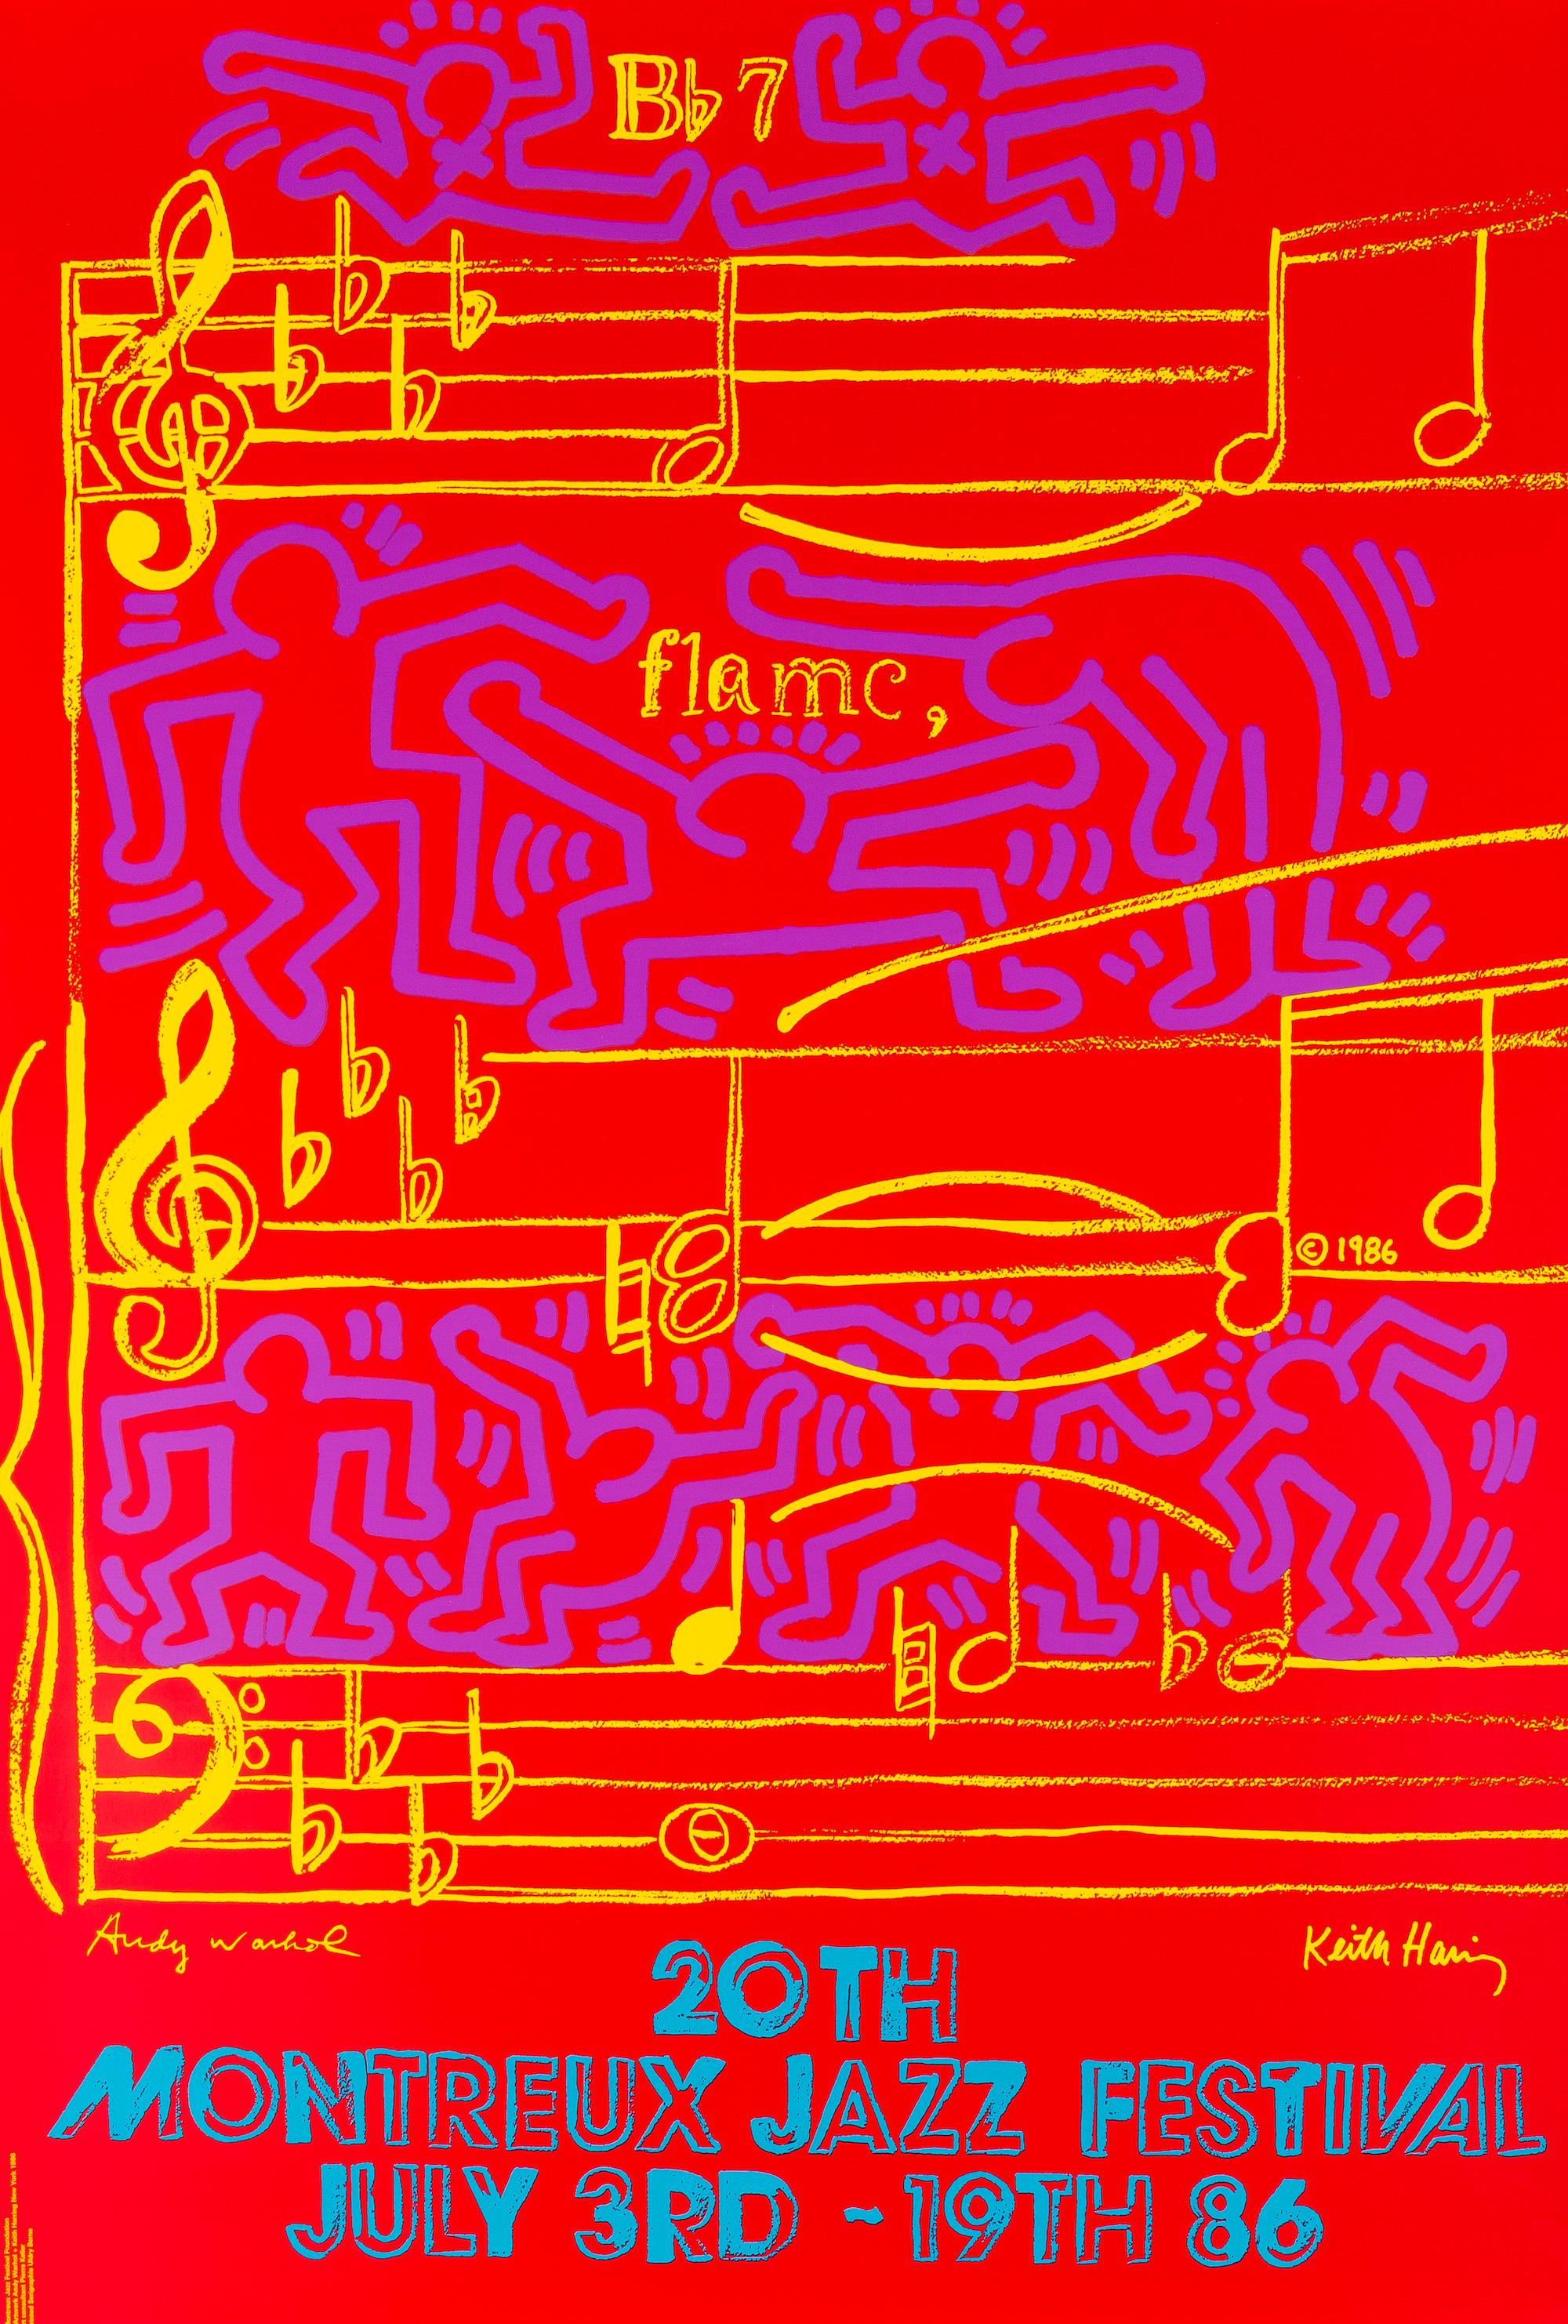 KEITH HARING, ANDY WARHOL
20th Montreux Jazz Festival, 1986

Screenprint in colours, on thick wove paper
Sheet :100.0 x 70.0 cm (39.4 × 27.6 in)